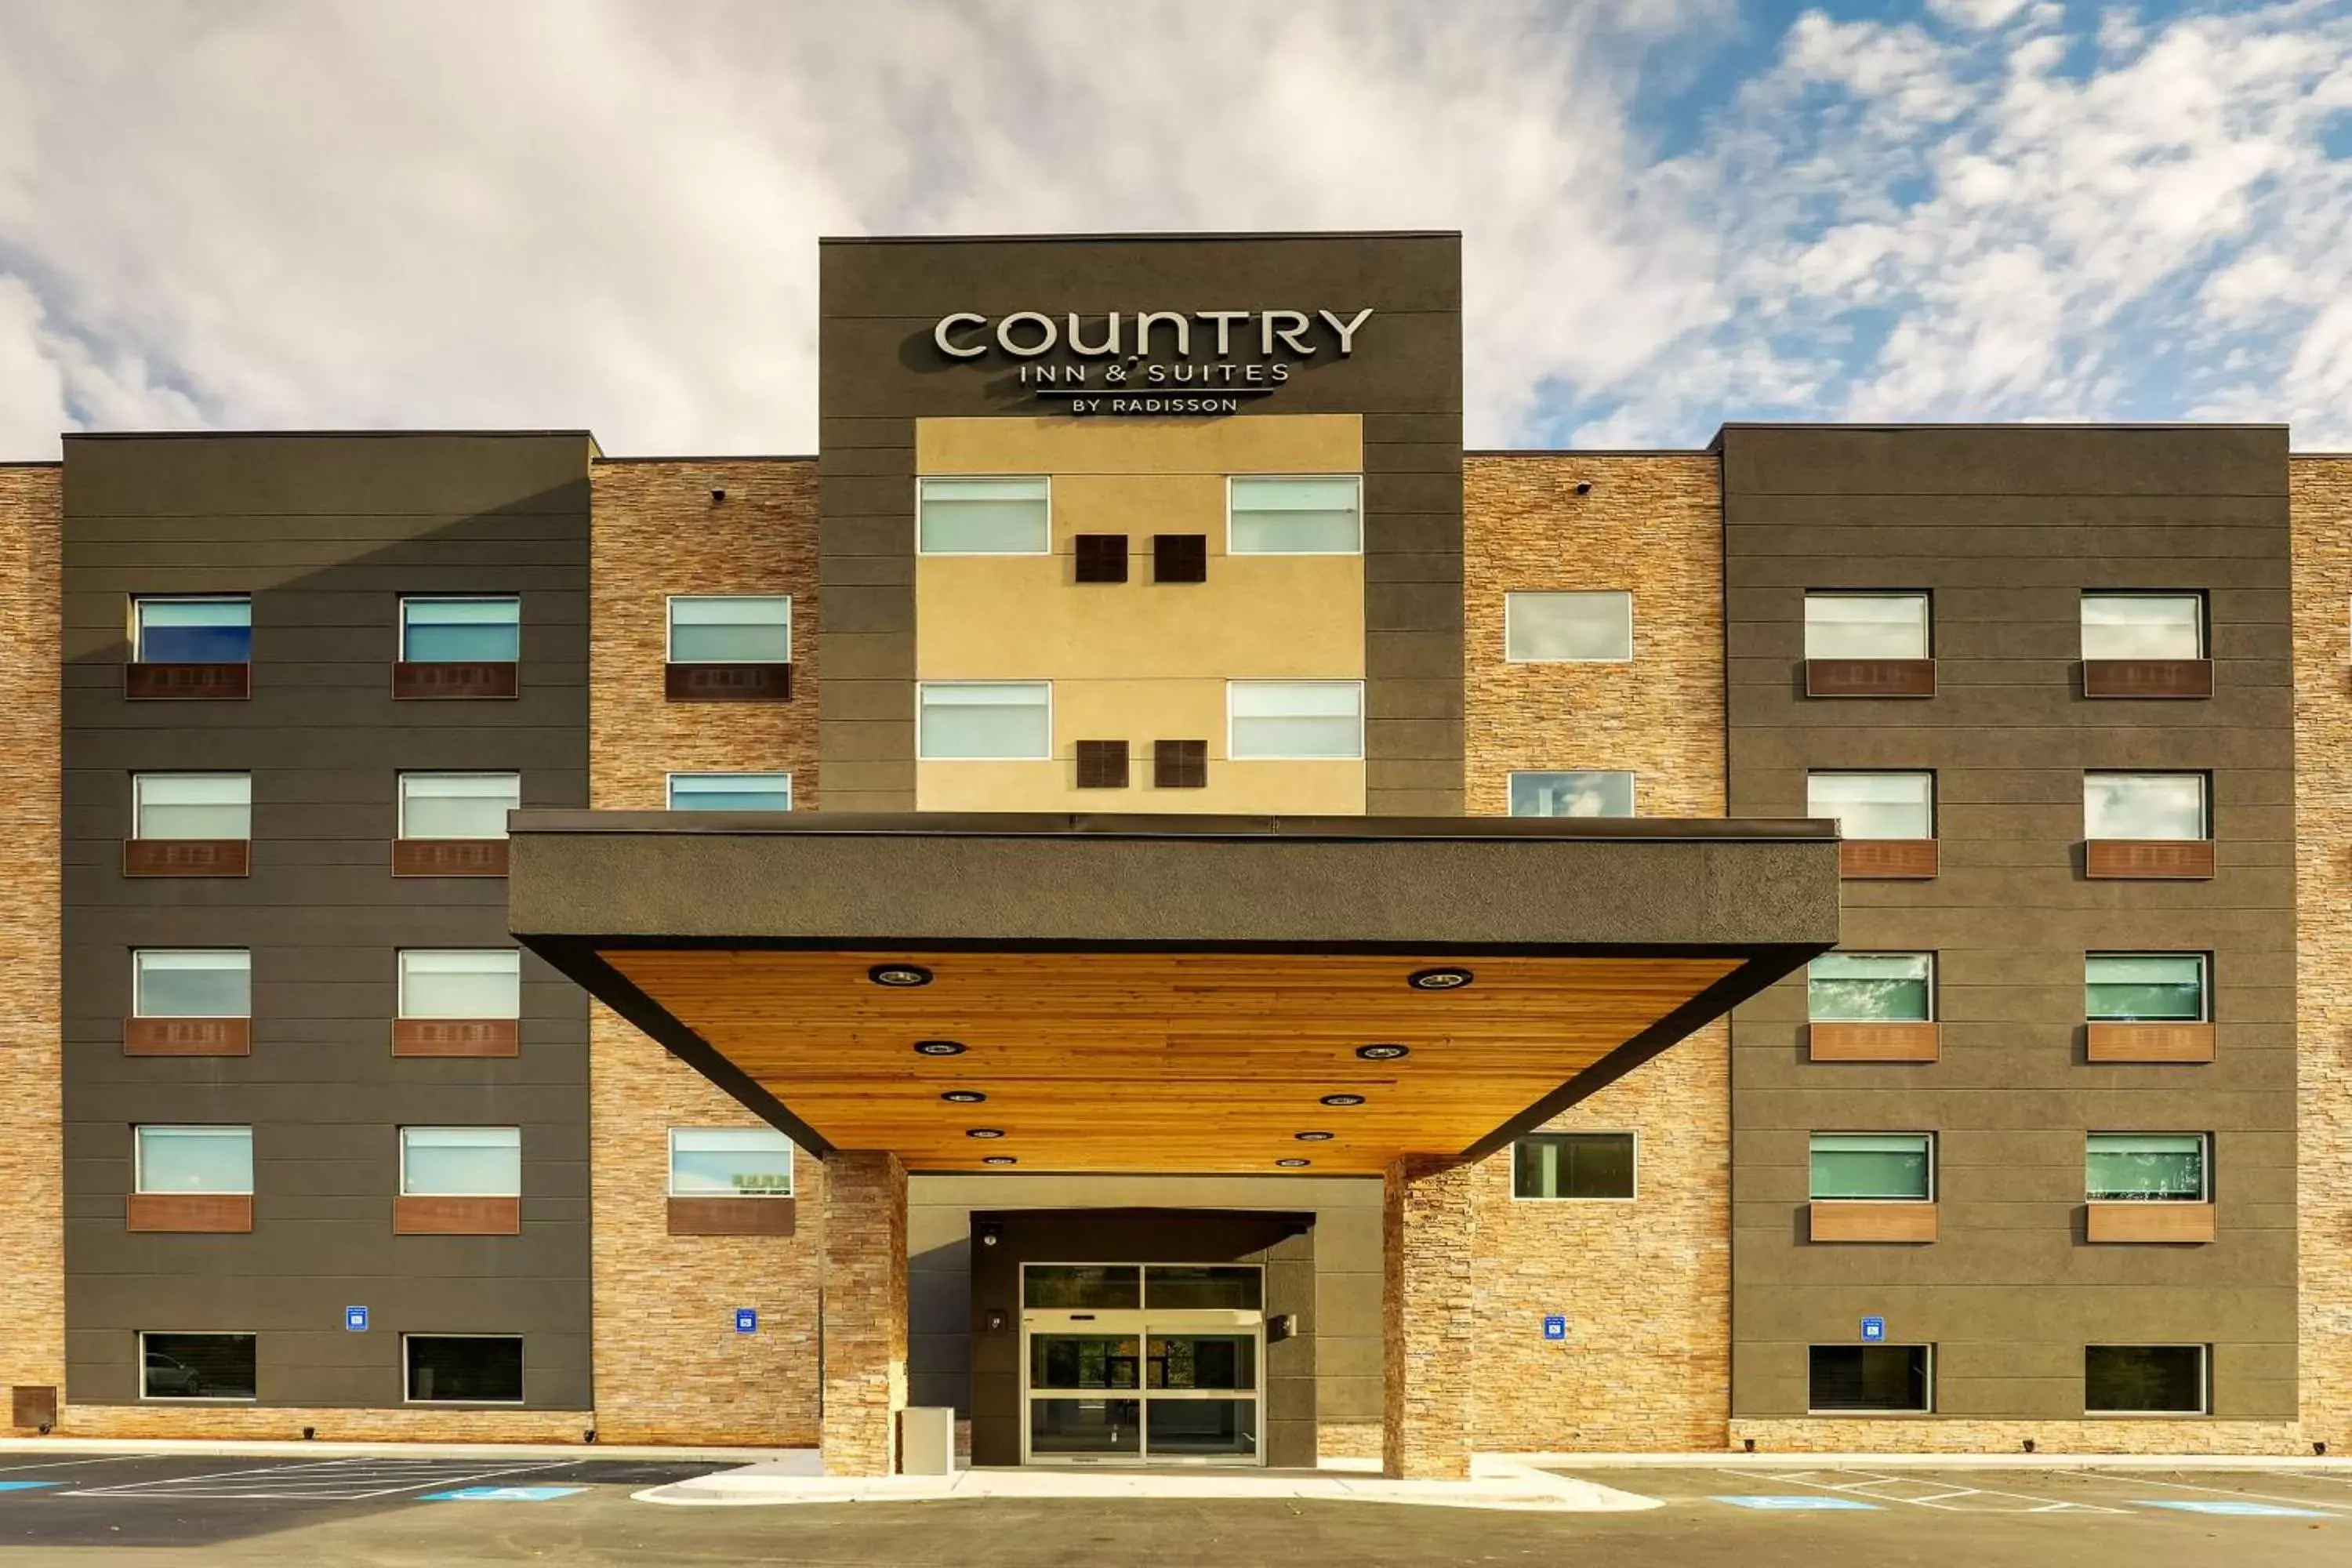 Property Building in Country Inn & Suites by Radisson, Cumming, GA